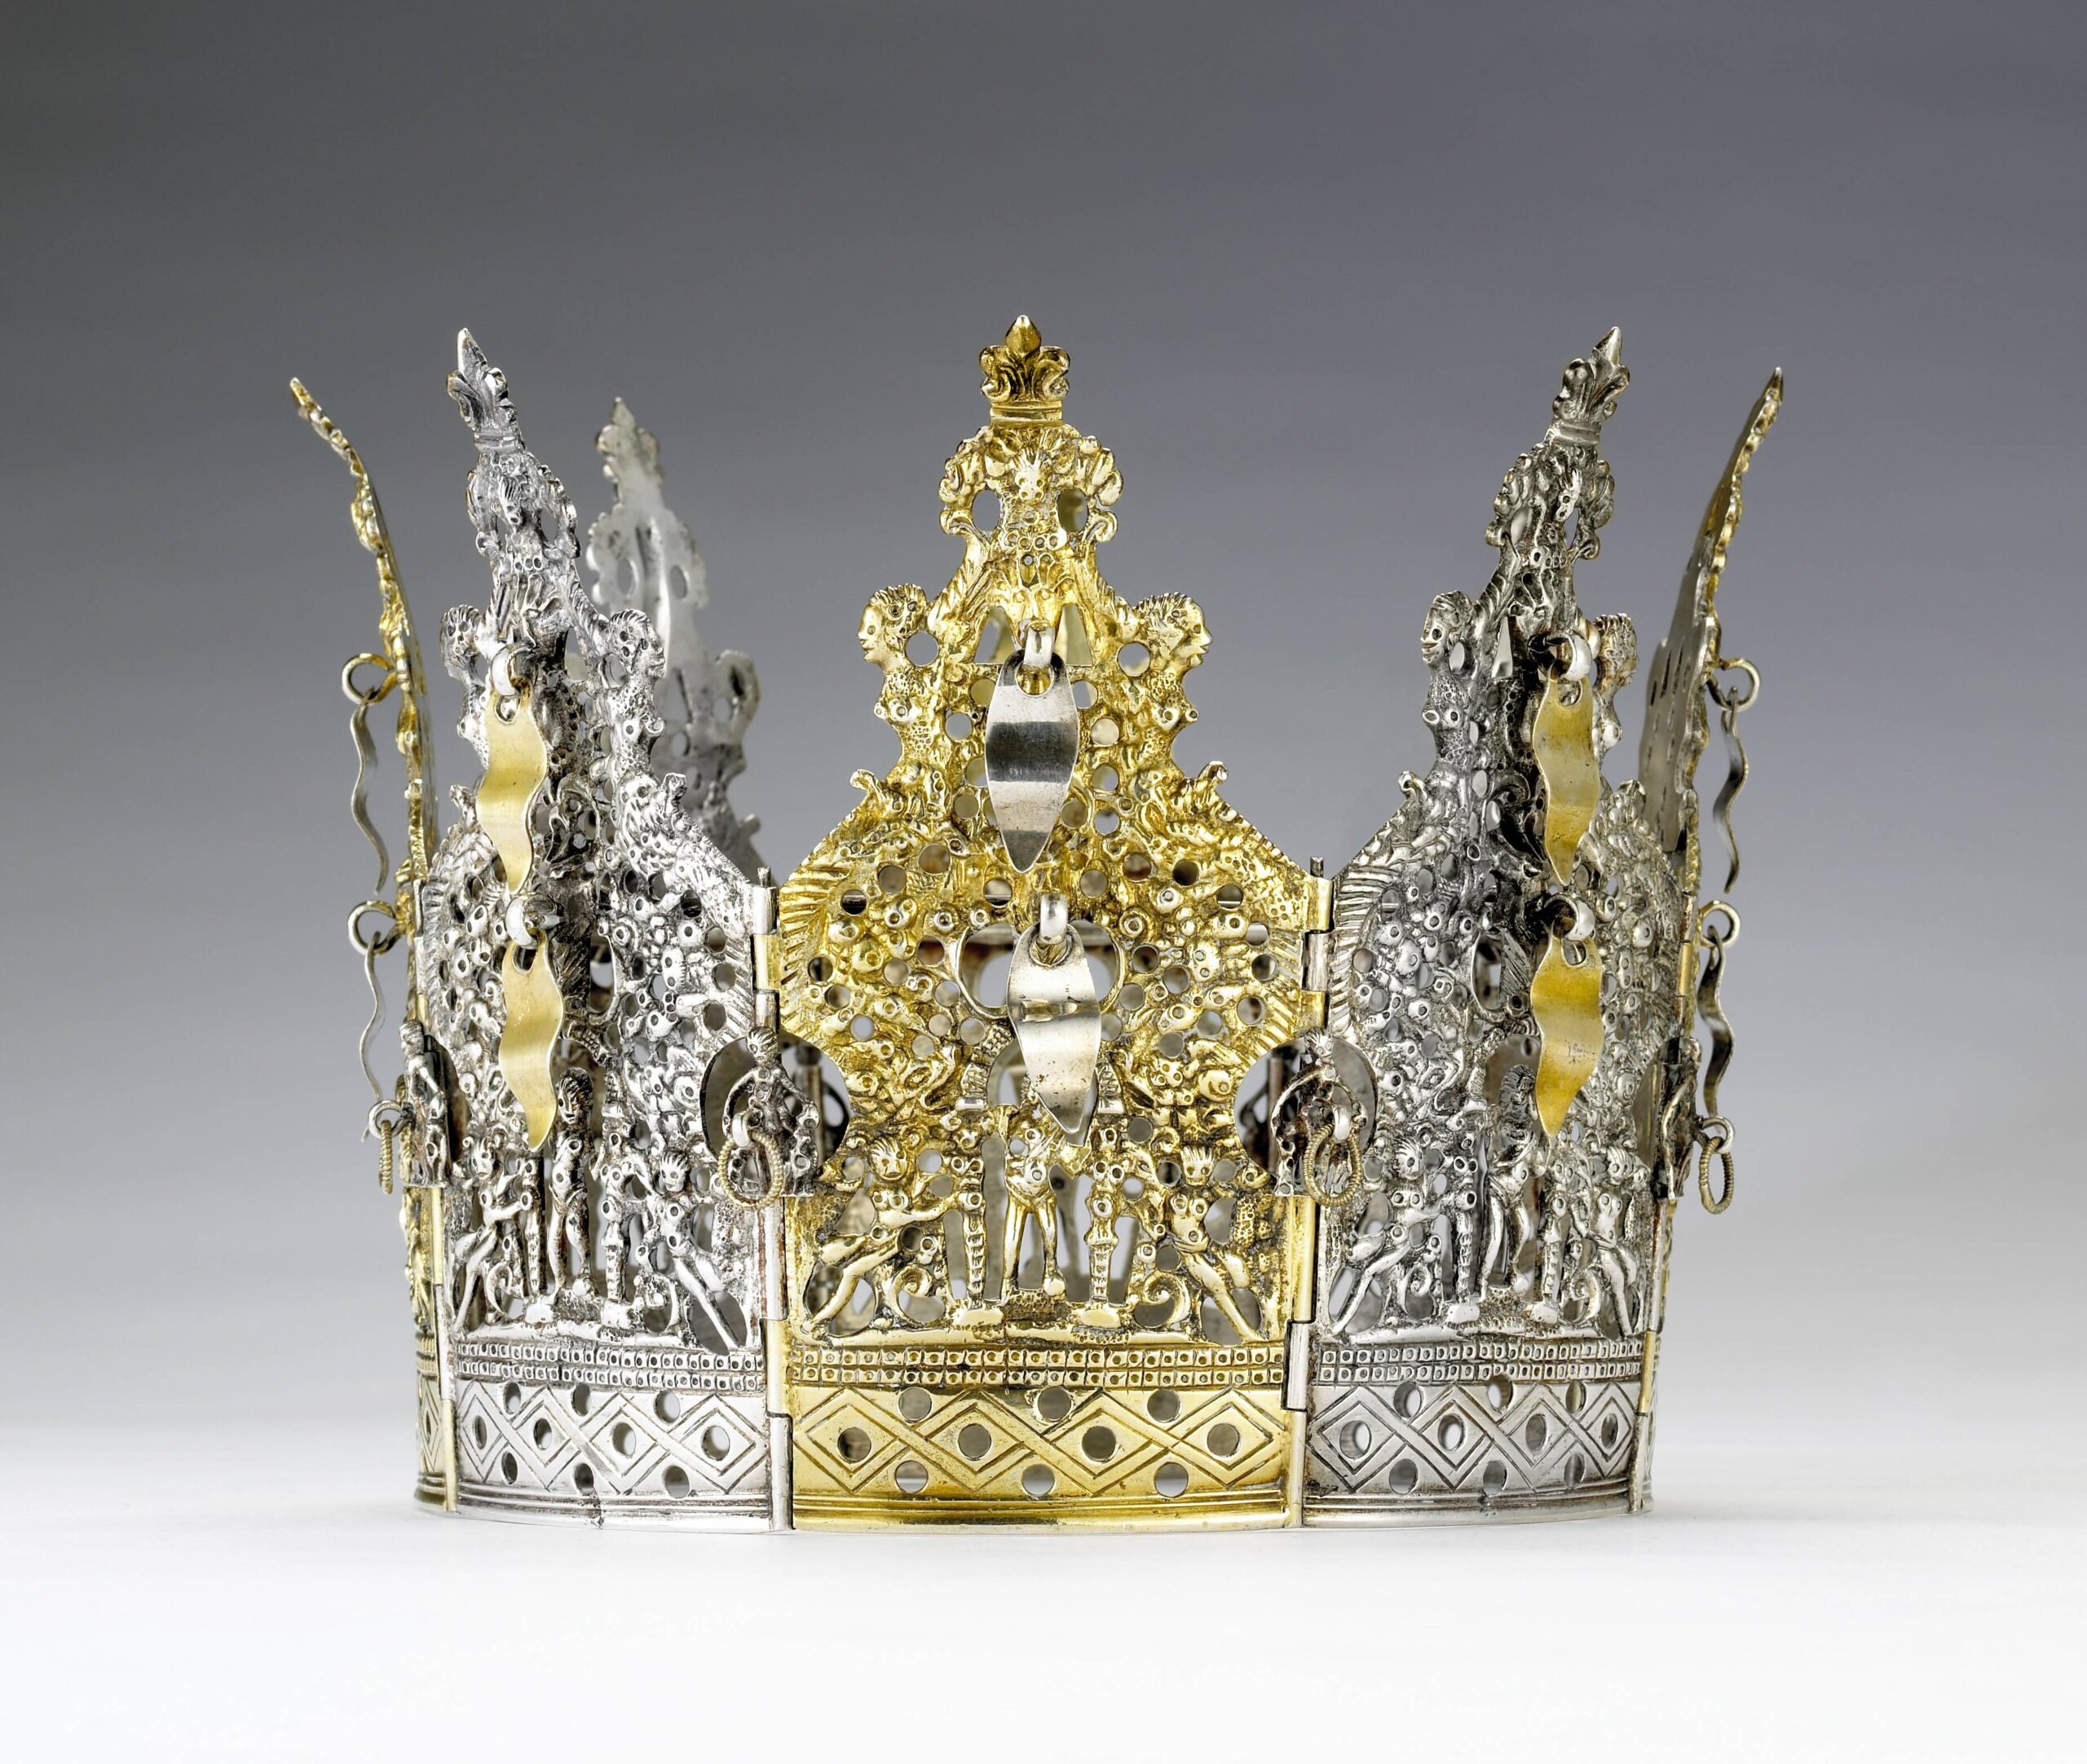 Ornate silver and silver-gilt bridal crown from the Christen Sveaas Collection, dating between 1590–1610.